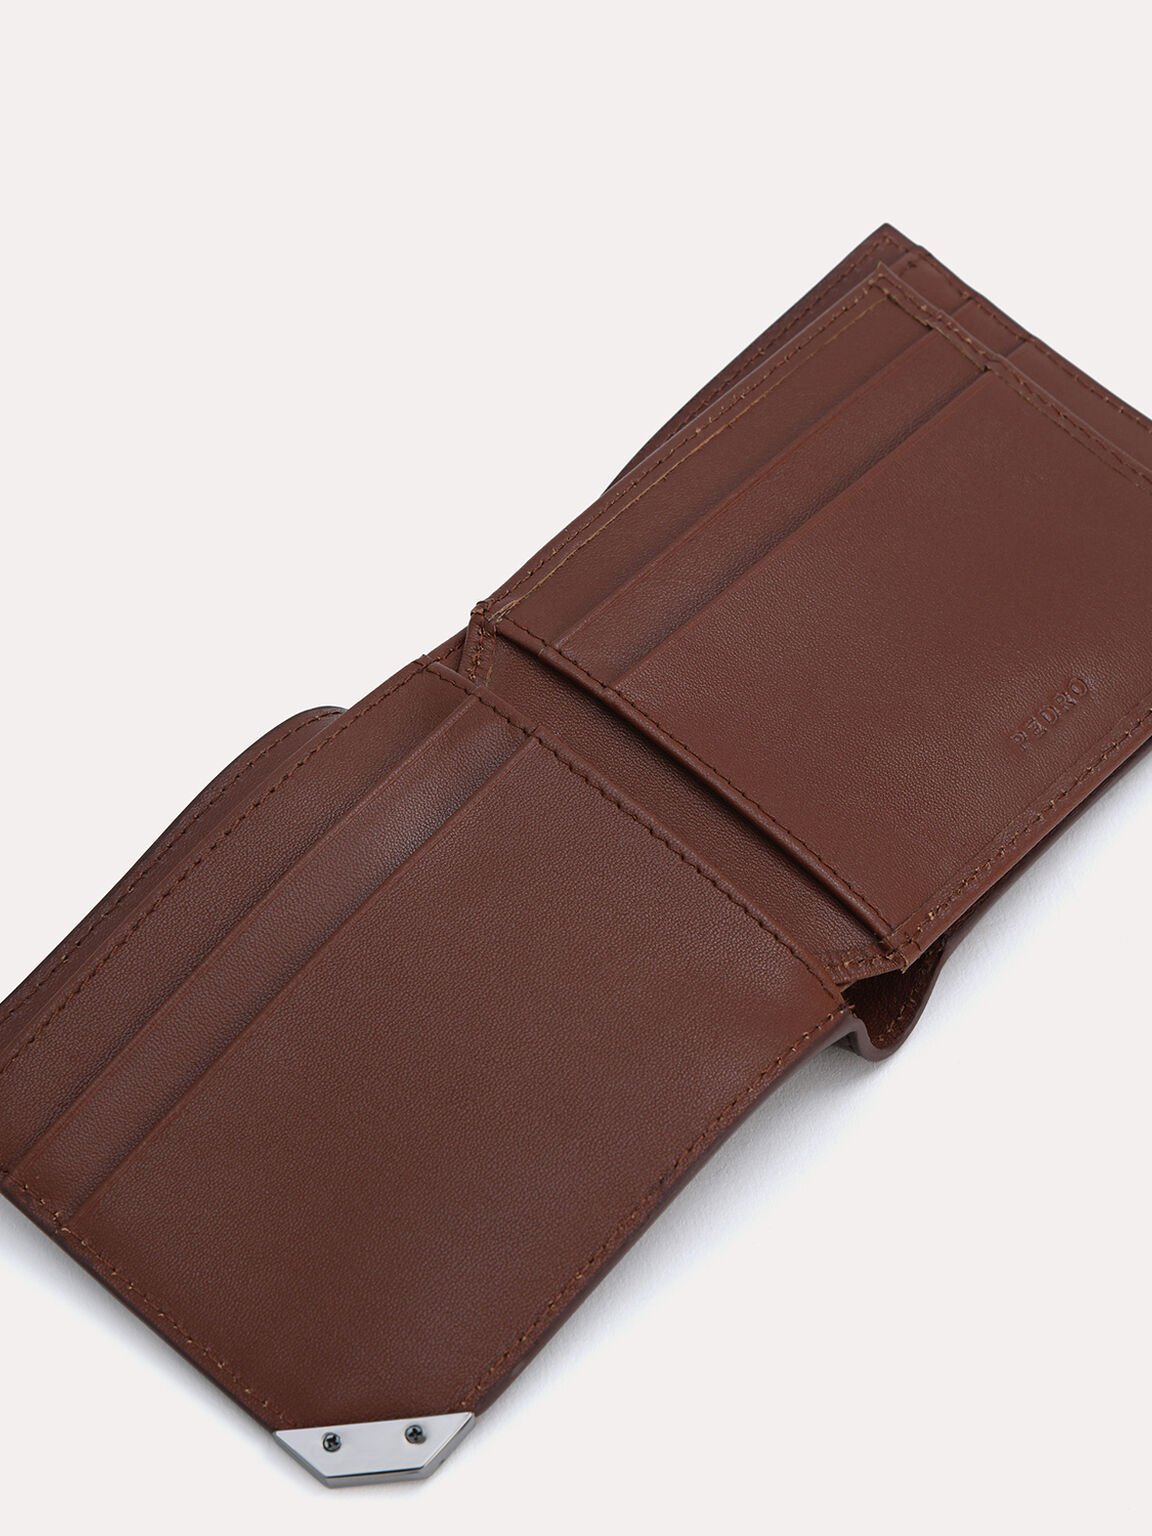 Textured Leather Bi-Fold Wallet with Flip, Brown, hi-res